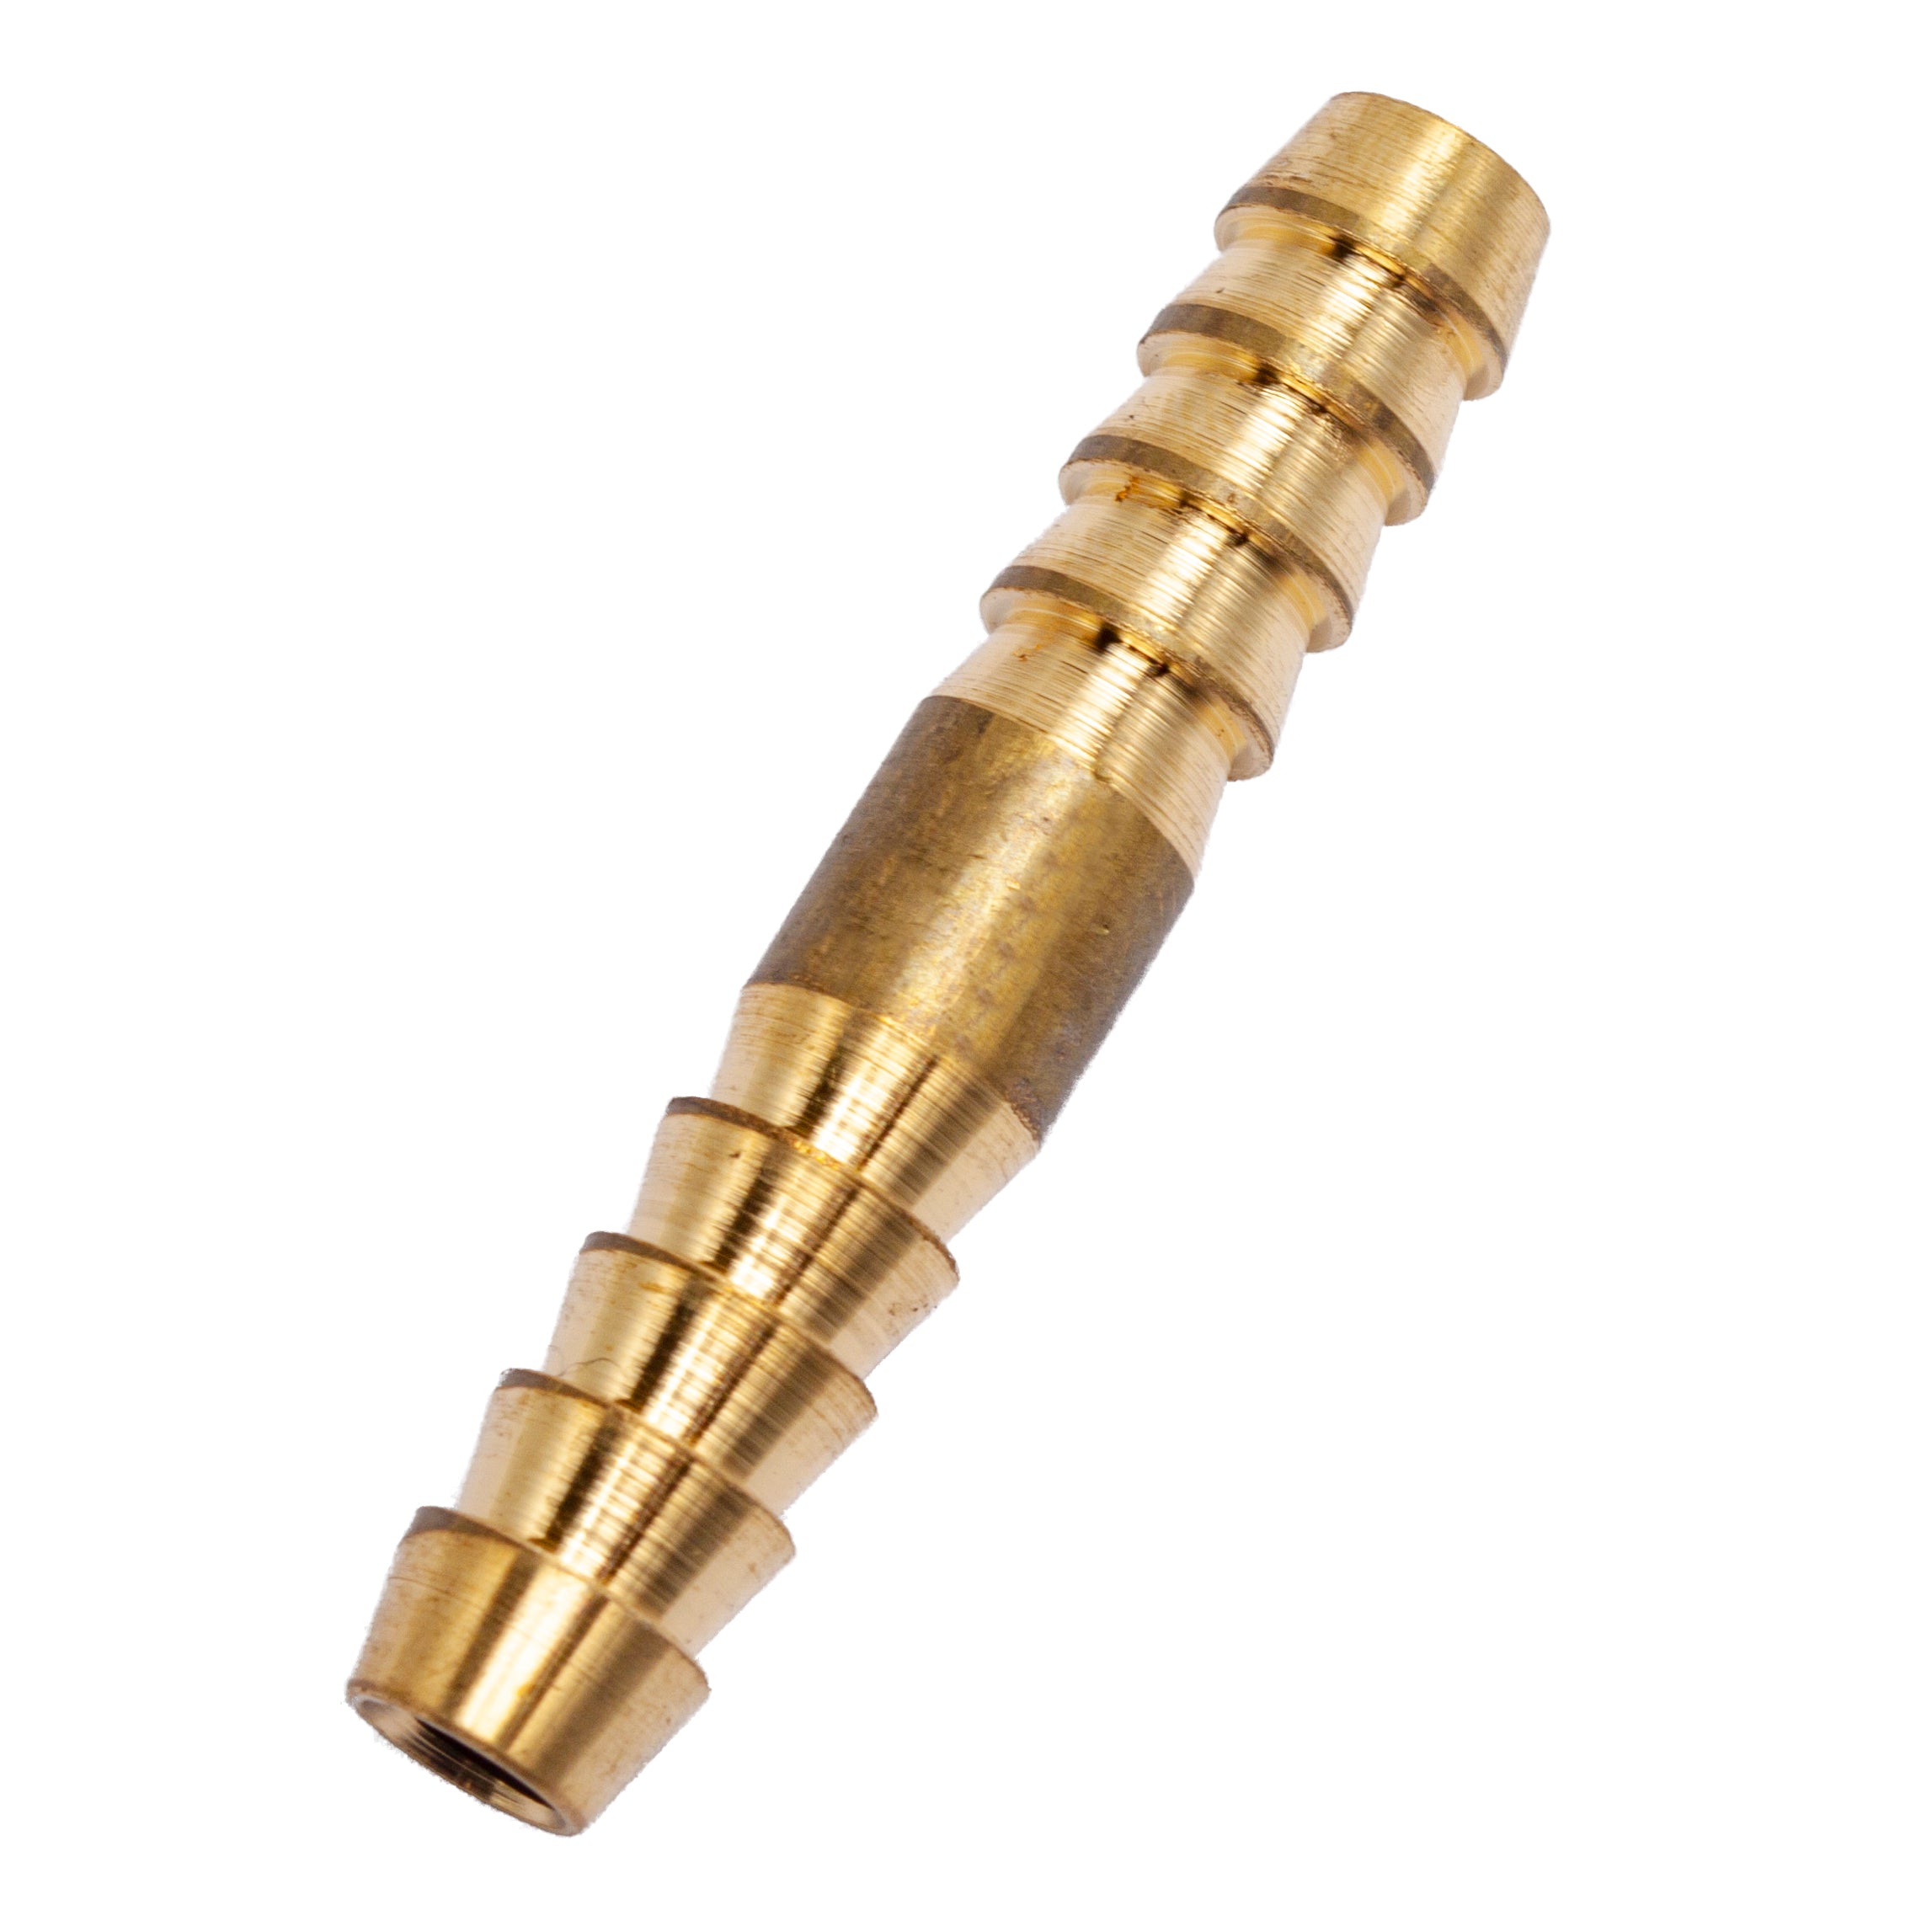 LTWFITTING Brass Barb Splicer Mender 1/4-Inch (6mm) Hose ID Fitting Air Water Fuel Hose Joiner (Pack of 10)